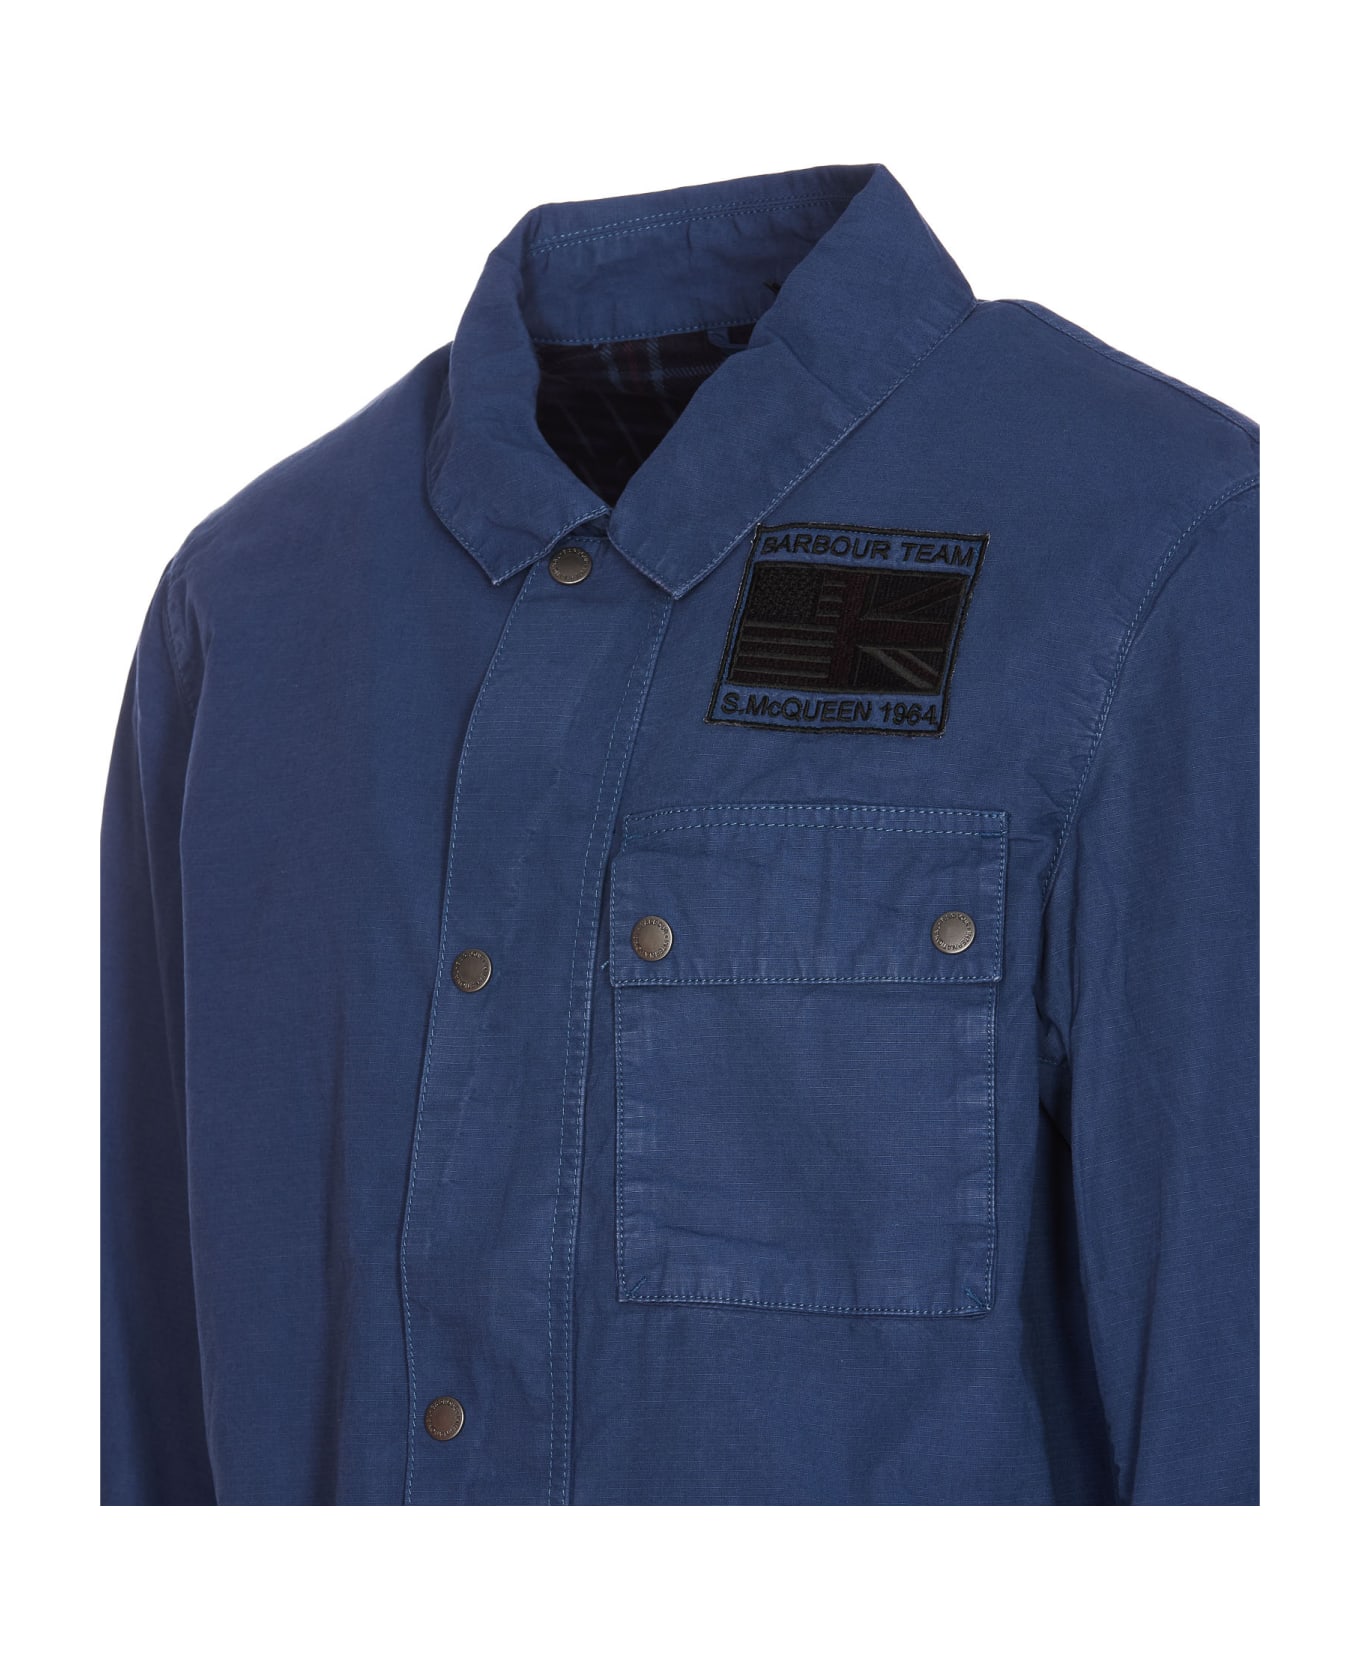 Barbour Workers Casual Jacket - Blue ブレザー